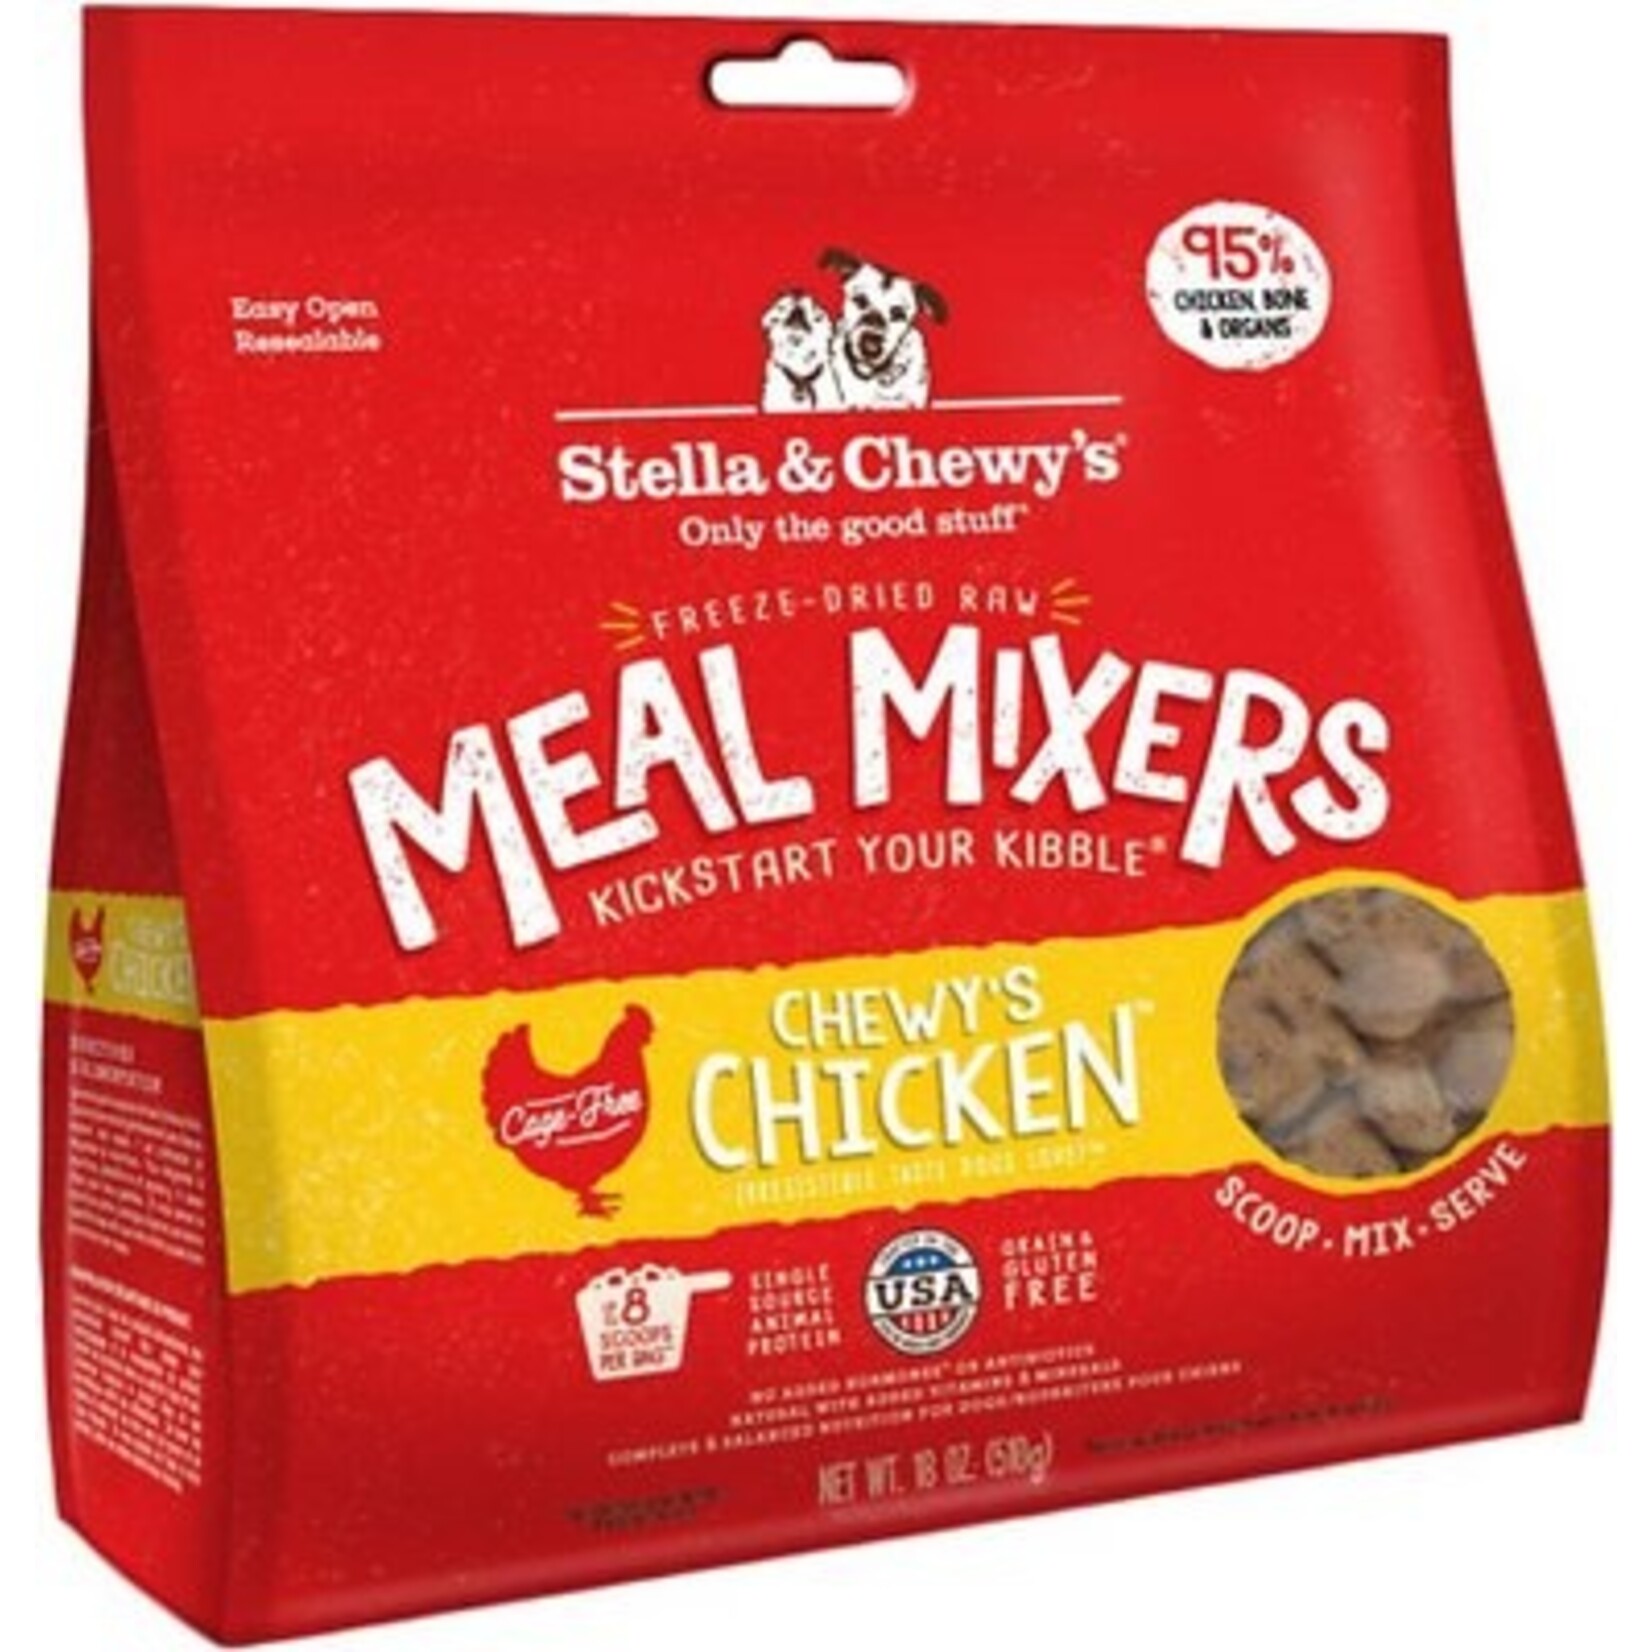 Stella & Chewy's Chewy's Chicken - Freeze-Dried Meal Mixer - Stella & Chewy's